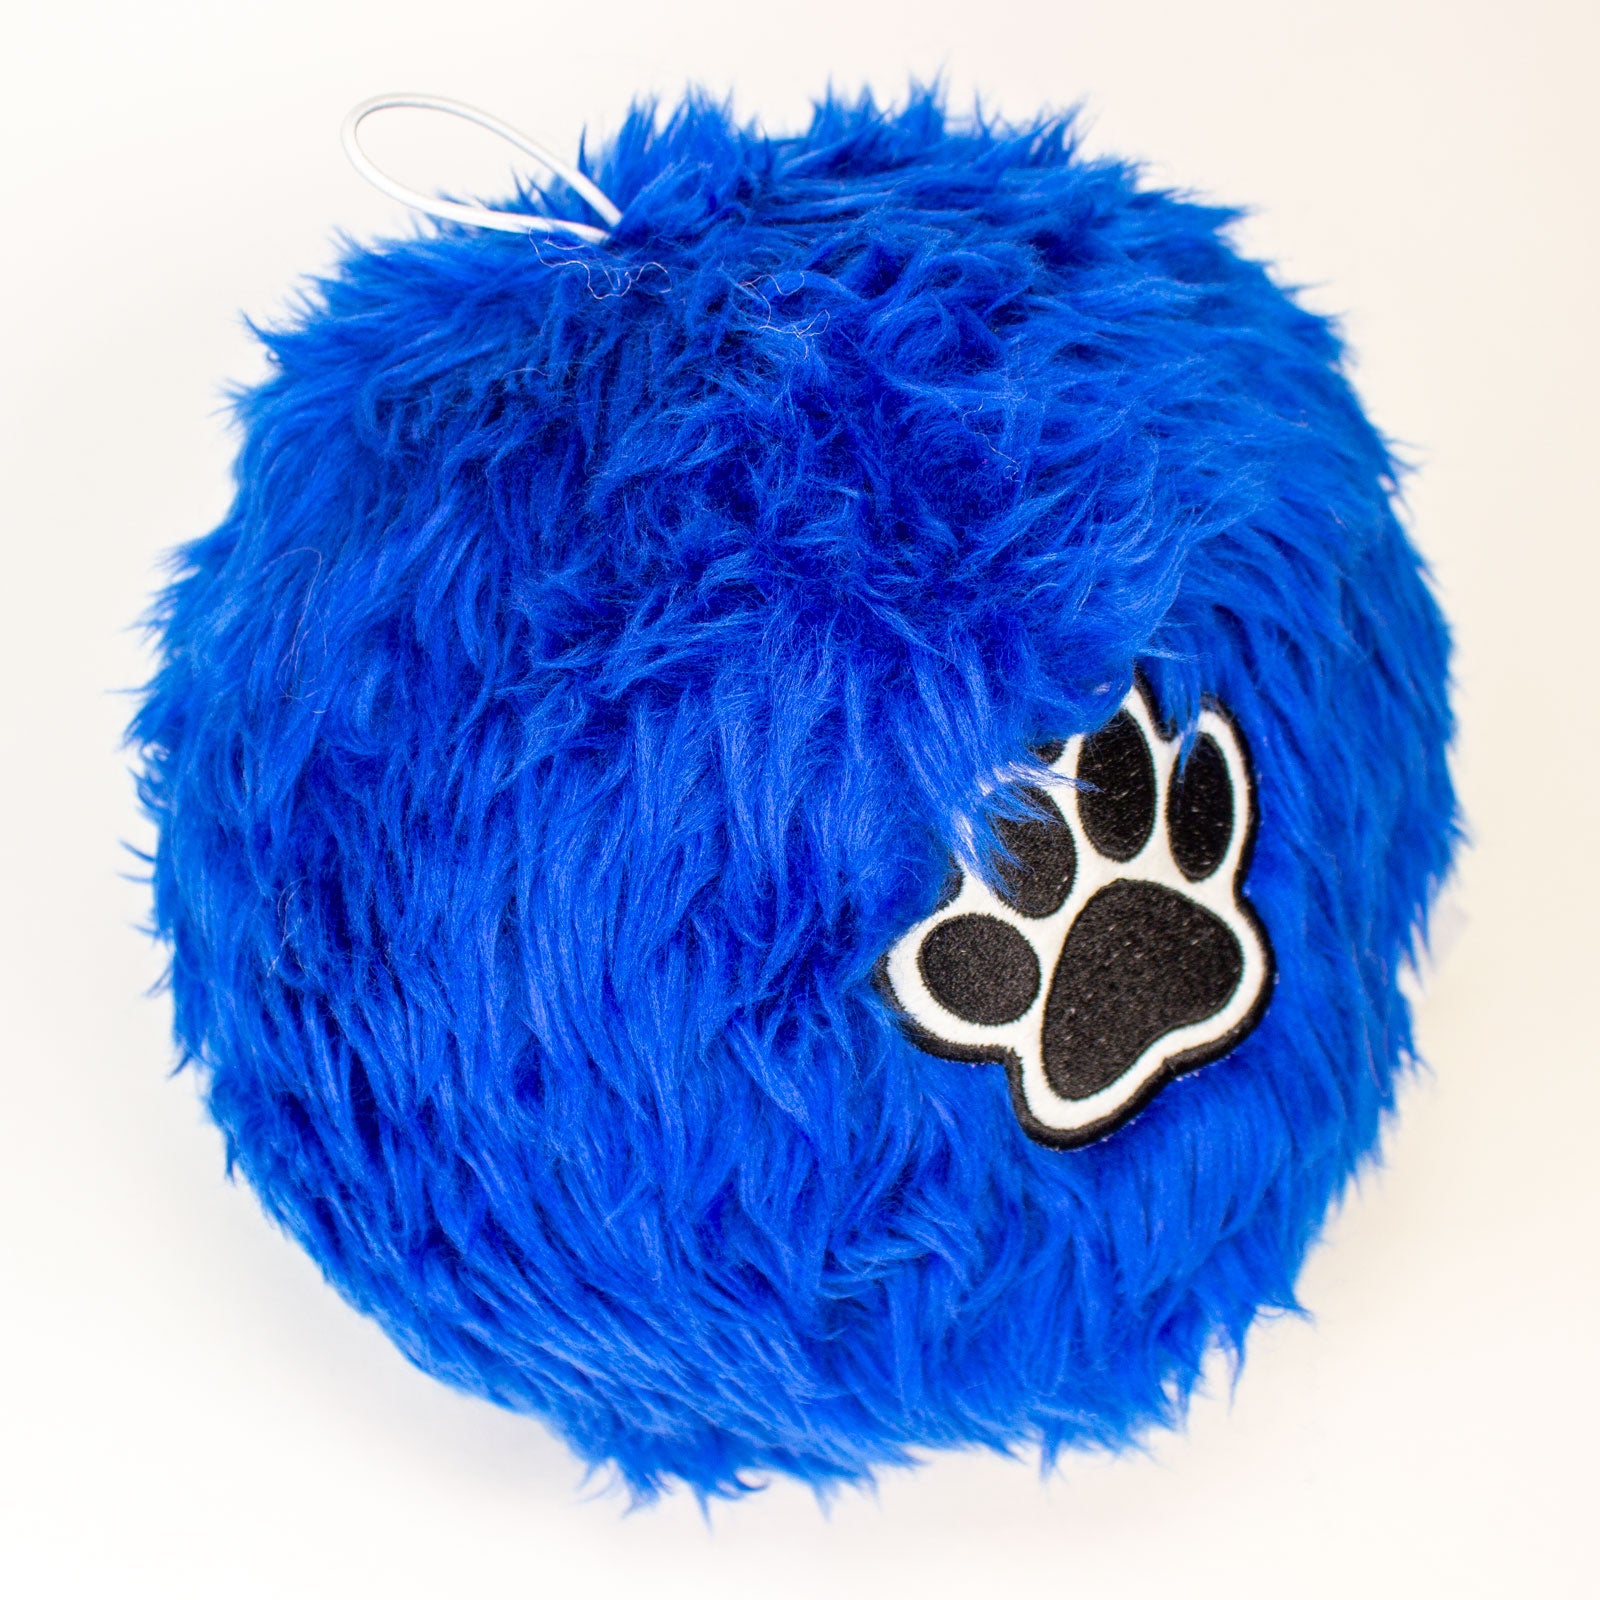 Soft Fluffy Ball For Border Collie Dogs - Large Size